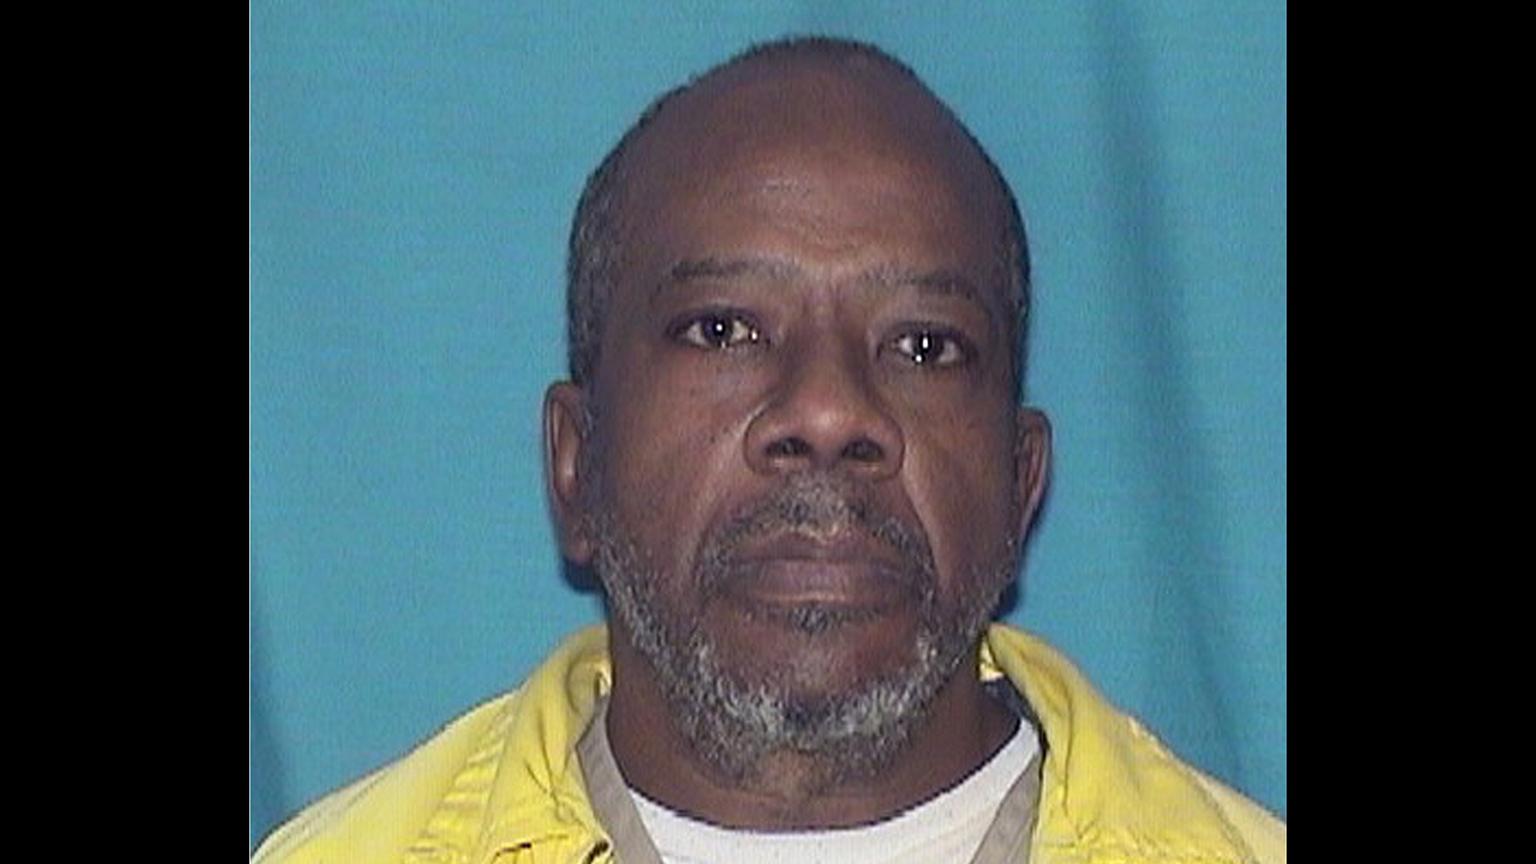 This undated photo provided by the Illinois Department of Corrections shows Larry Earvin, a former inmate at Western Illinois Correctional Center in Mt Sterling, Ill.(Illinois Department of Corrections via AP)